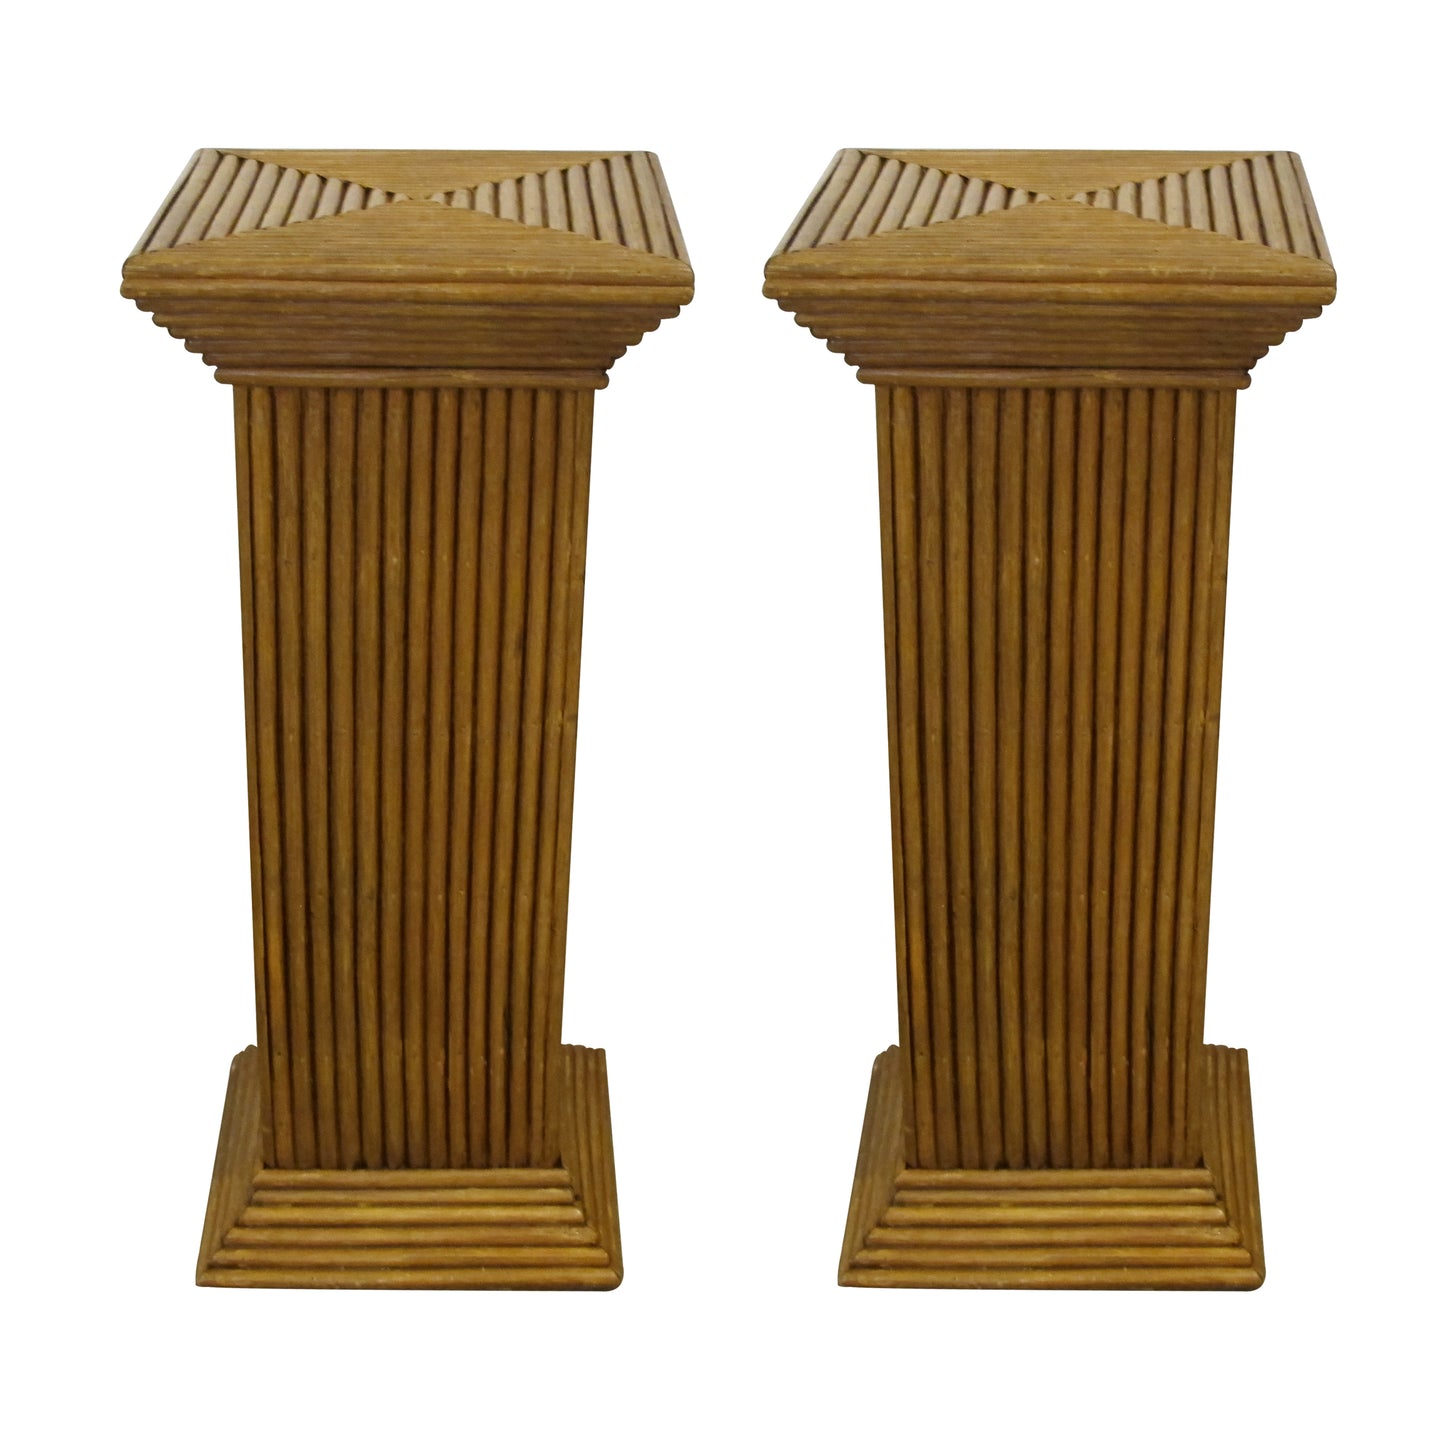 Mid -century pair of hand-crafted rattan pedestals, columns, plant stands